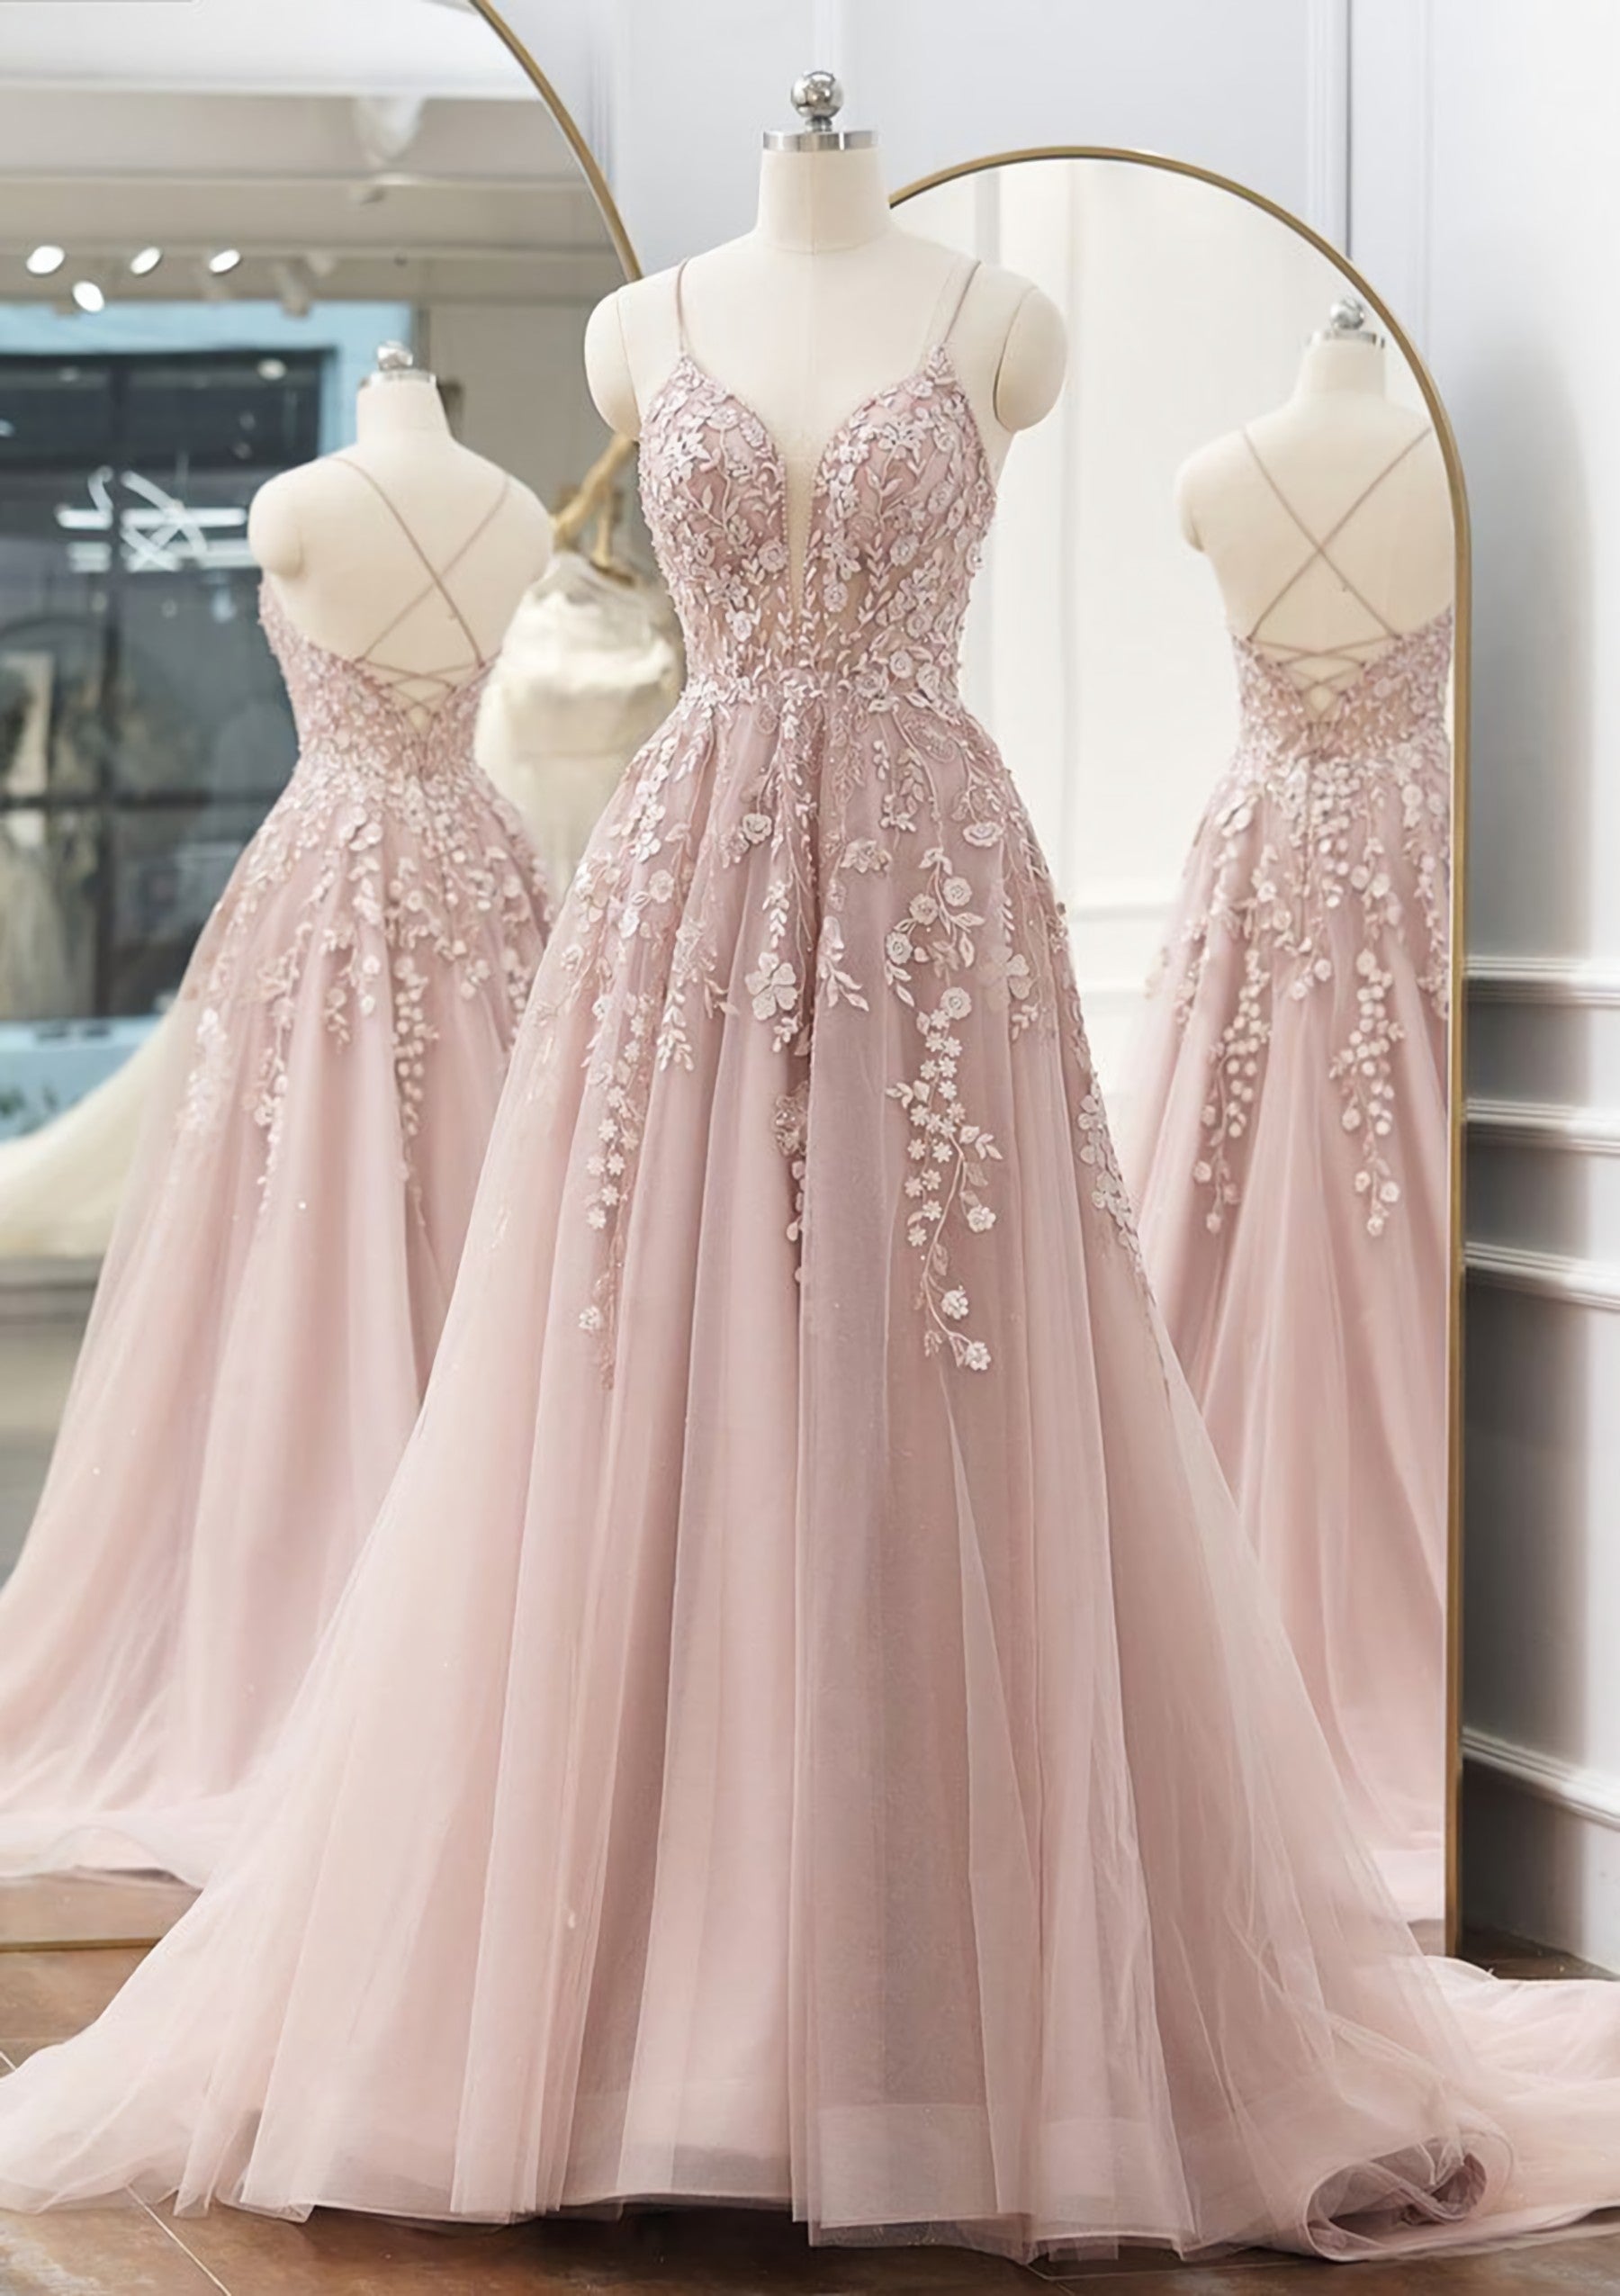 A-line V Neck Spaghetti Straps Sweep Train Tulle Corset Prom Dress With Appliqued Beading outfit, Nice Dress